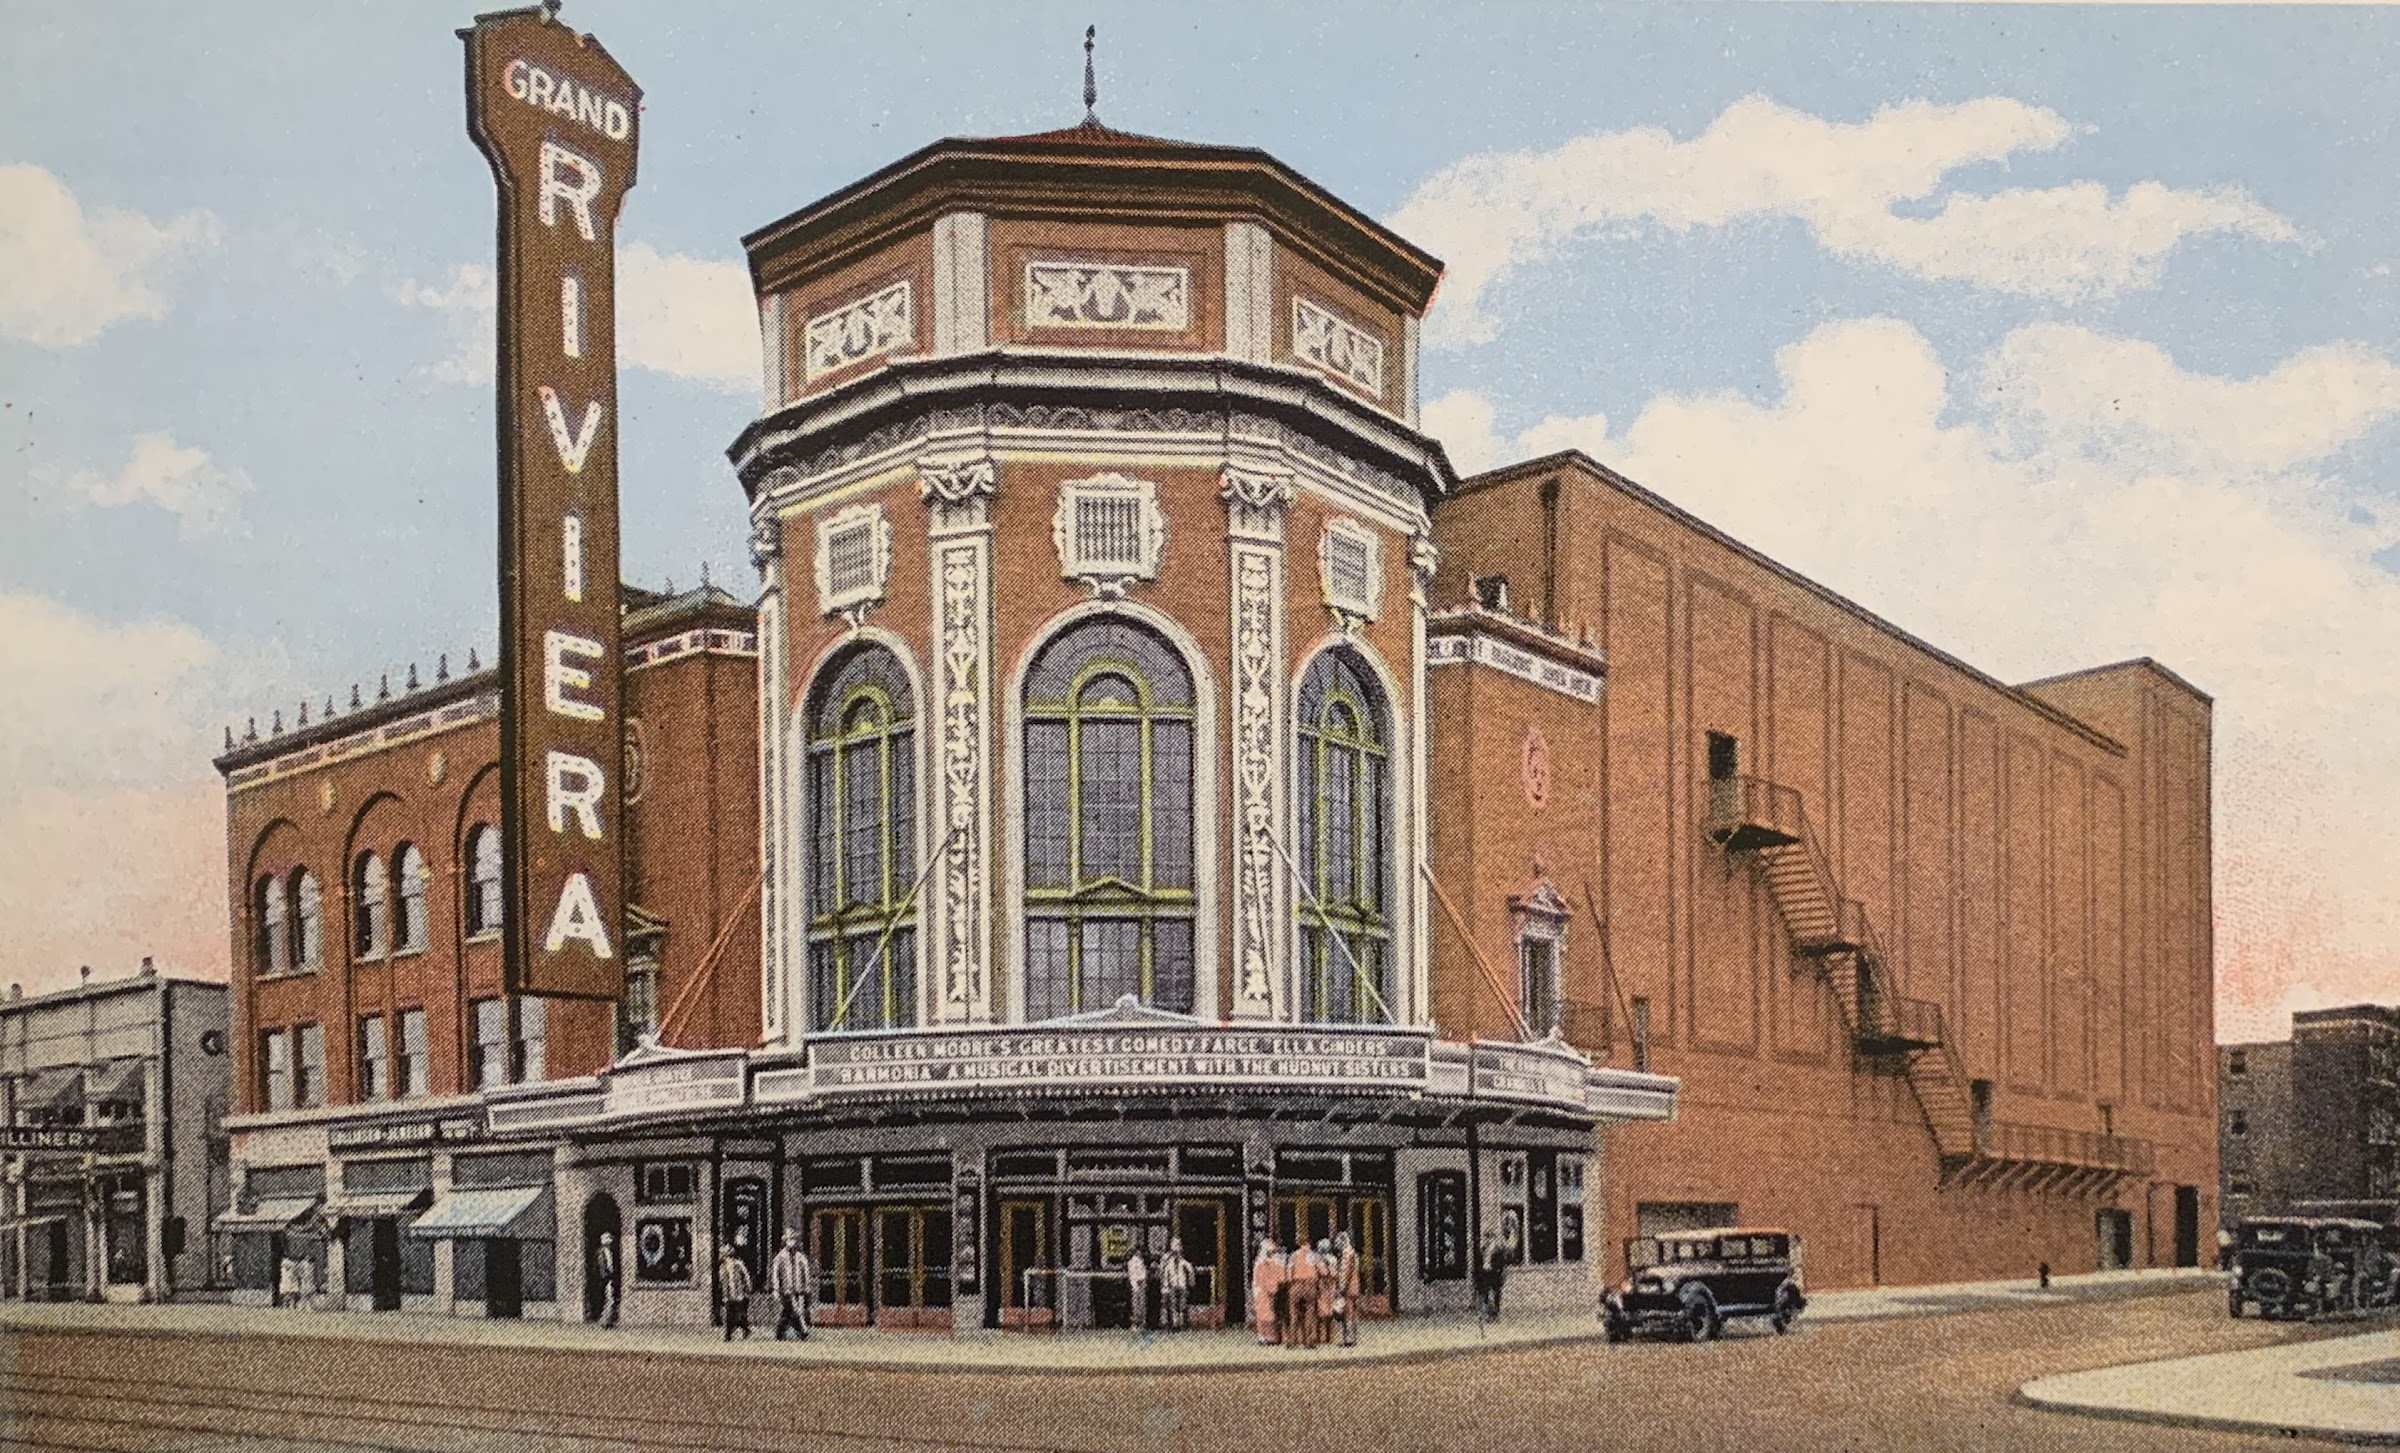 Built in 1925, Grand Riviera Theater cost over $1 million and seated over 3000. It had state-of-the-art electric lighting and “atmospheric” special effects. Closed in mid-1970s and remained vacant until demolished in 1996.